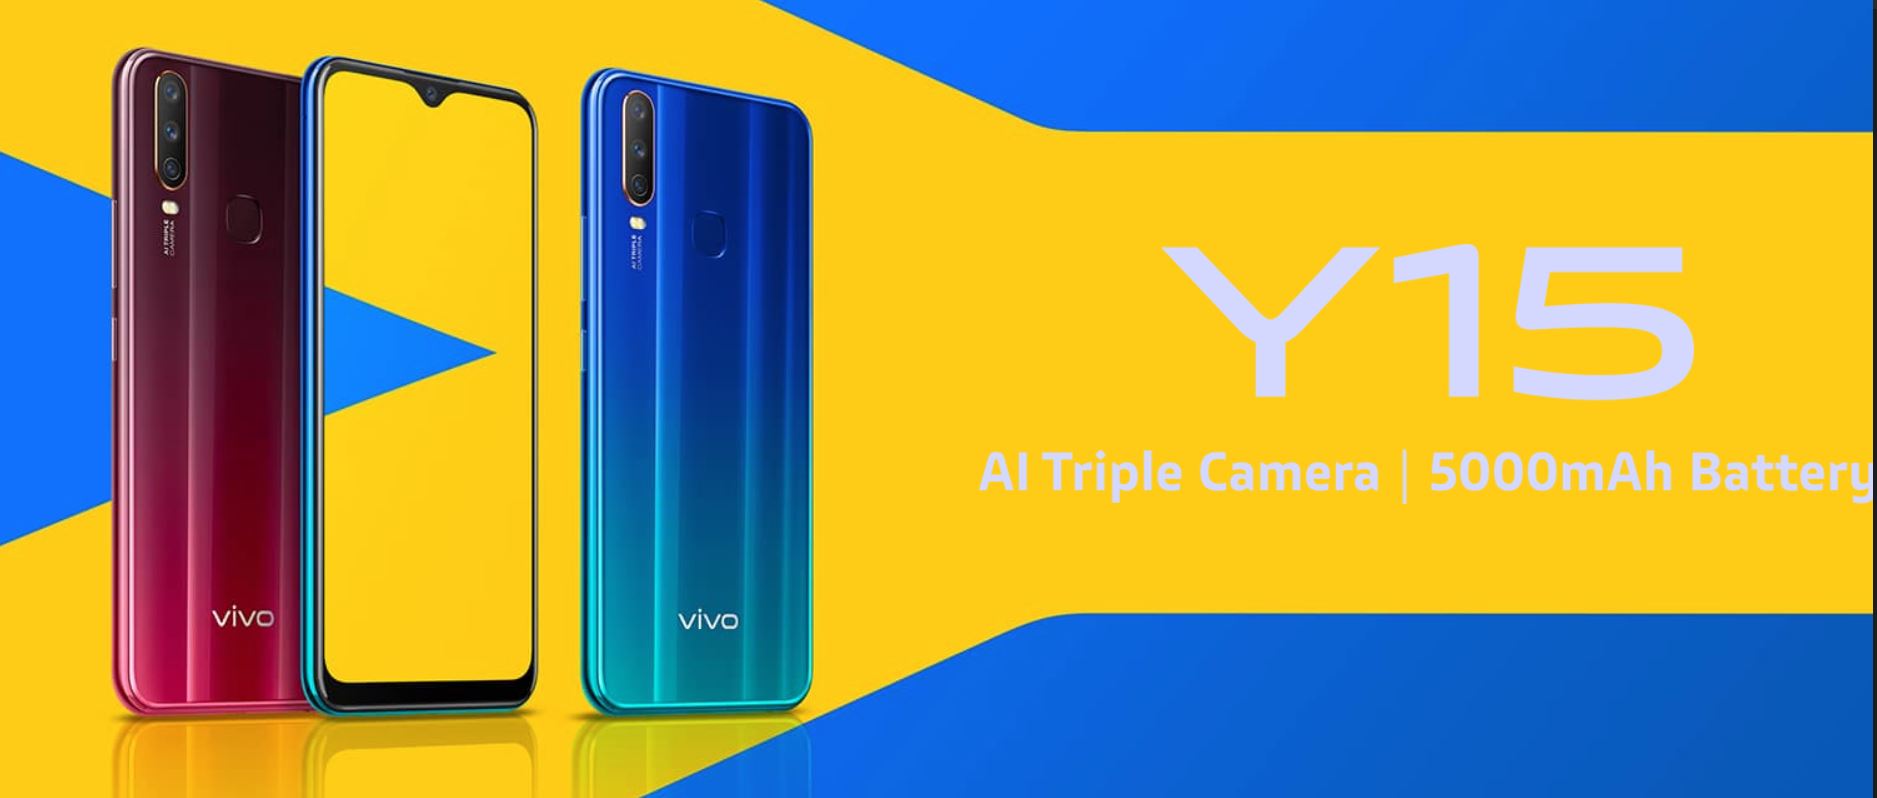 Vivo Y15 Launched Triple Camera 5000mah Helio P22 Cpu For P12k